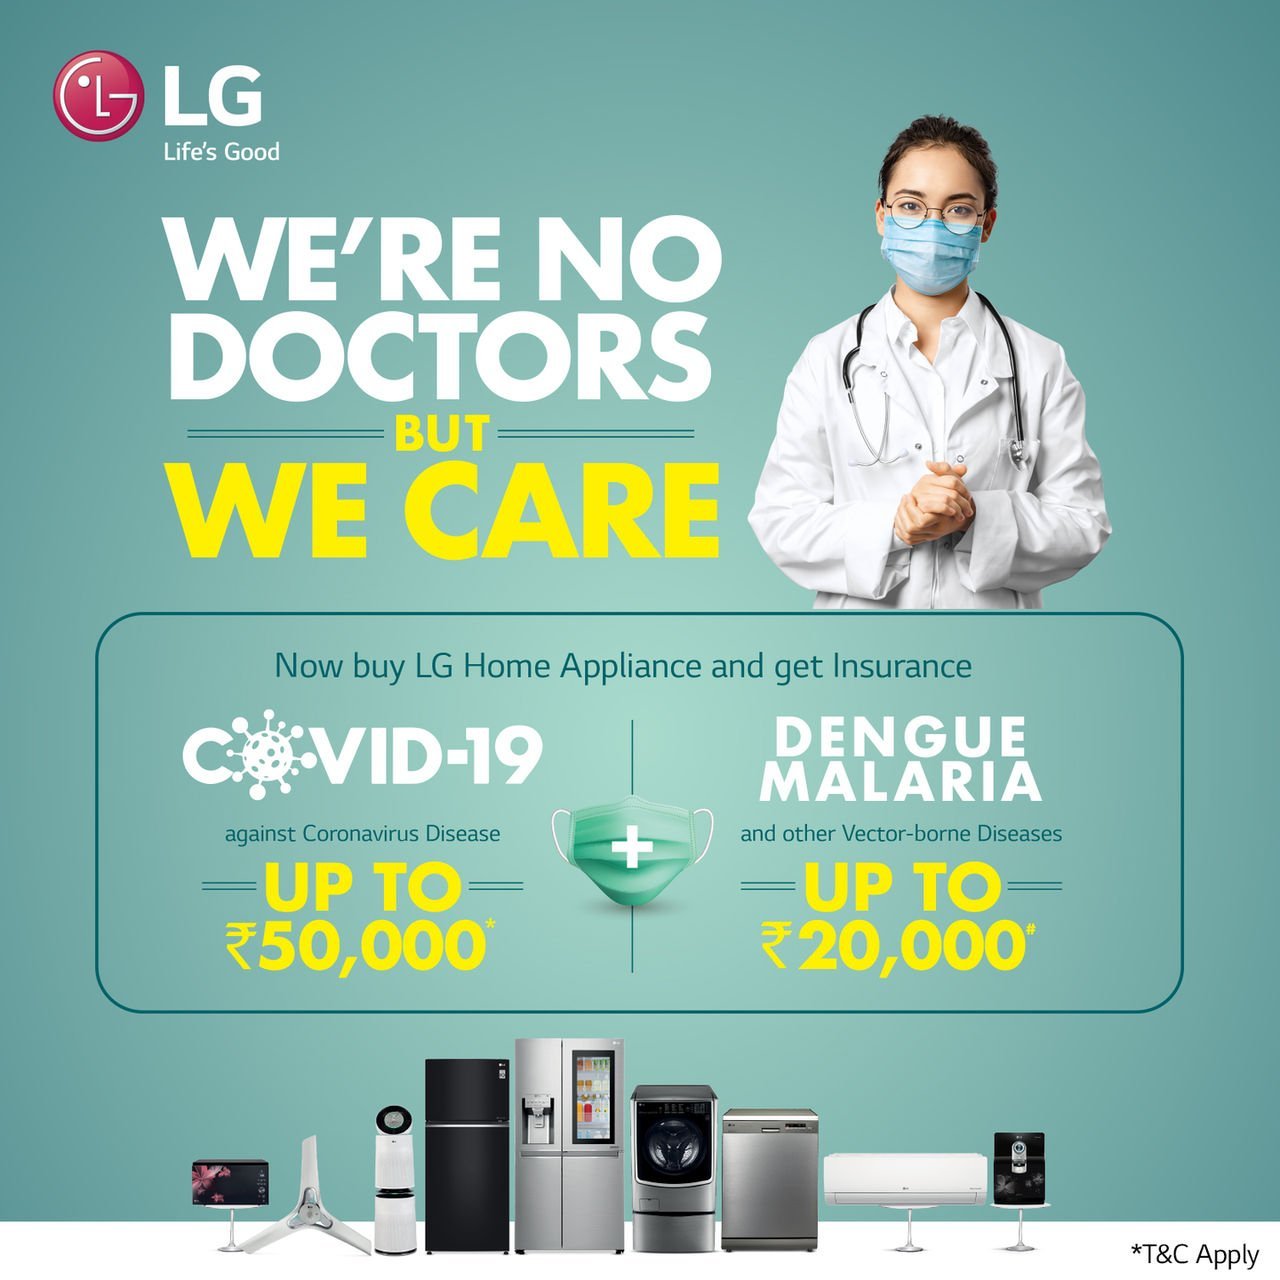 LG Offers Health Insurance Bundled With Its Home Appliances